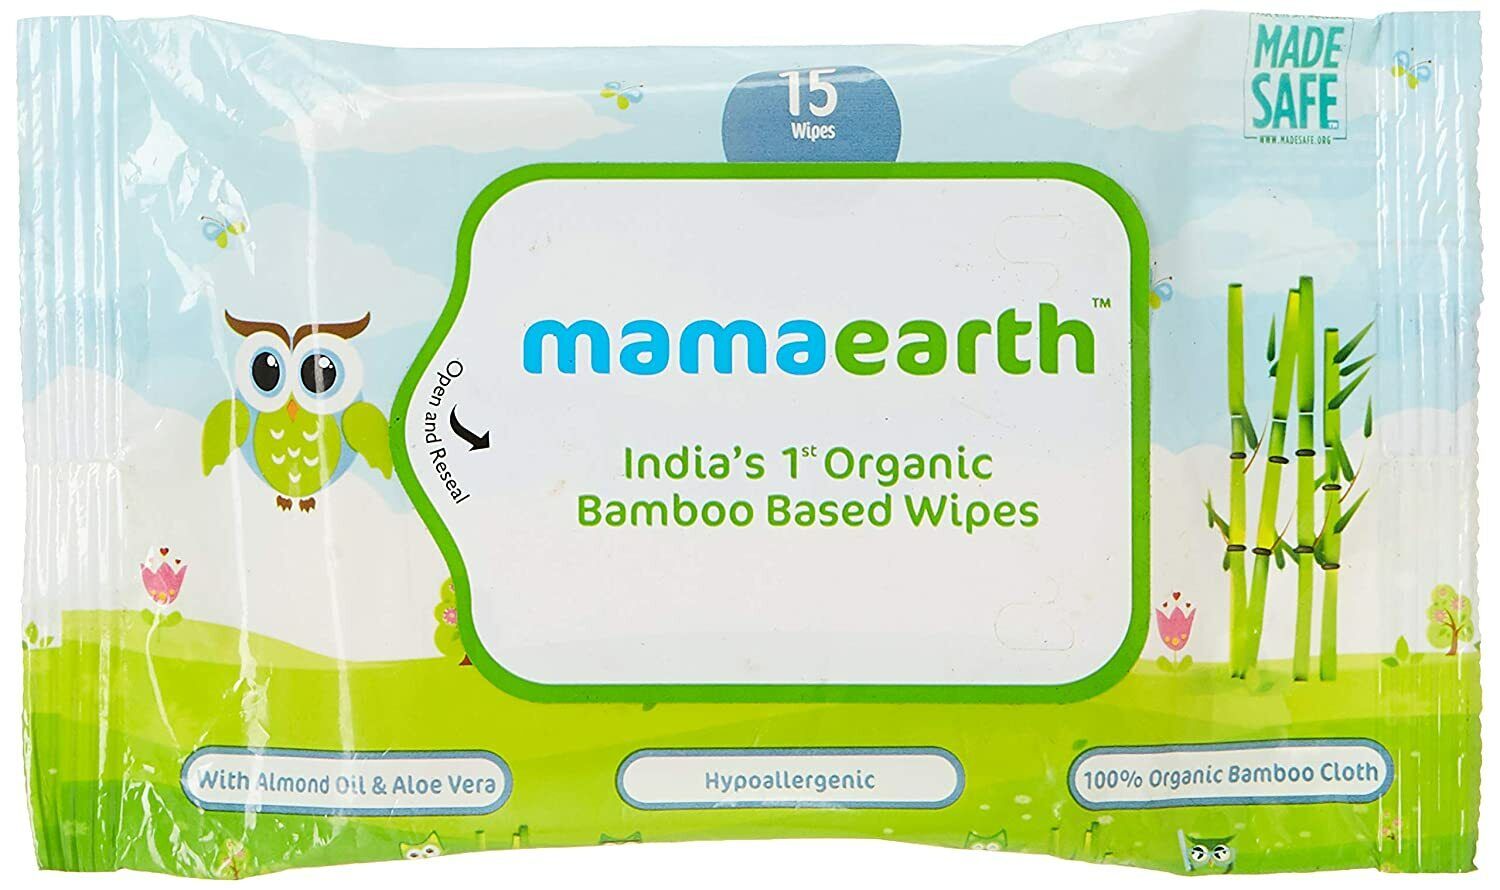 Mamaearth India's First Organic Bamboo Based Baby Wipes, 15 Wipes Free Shipping